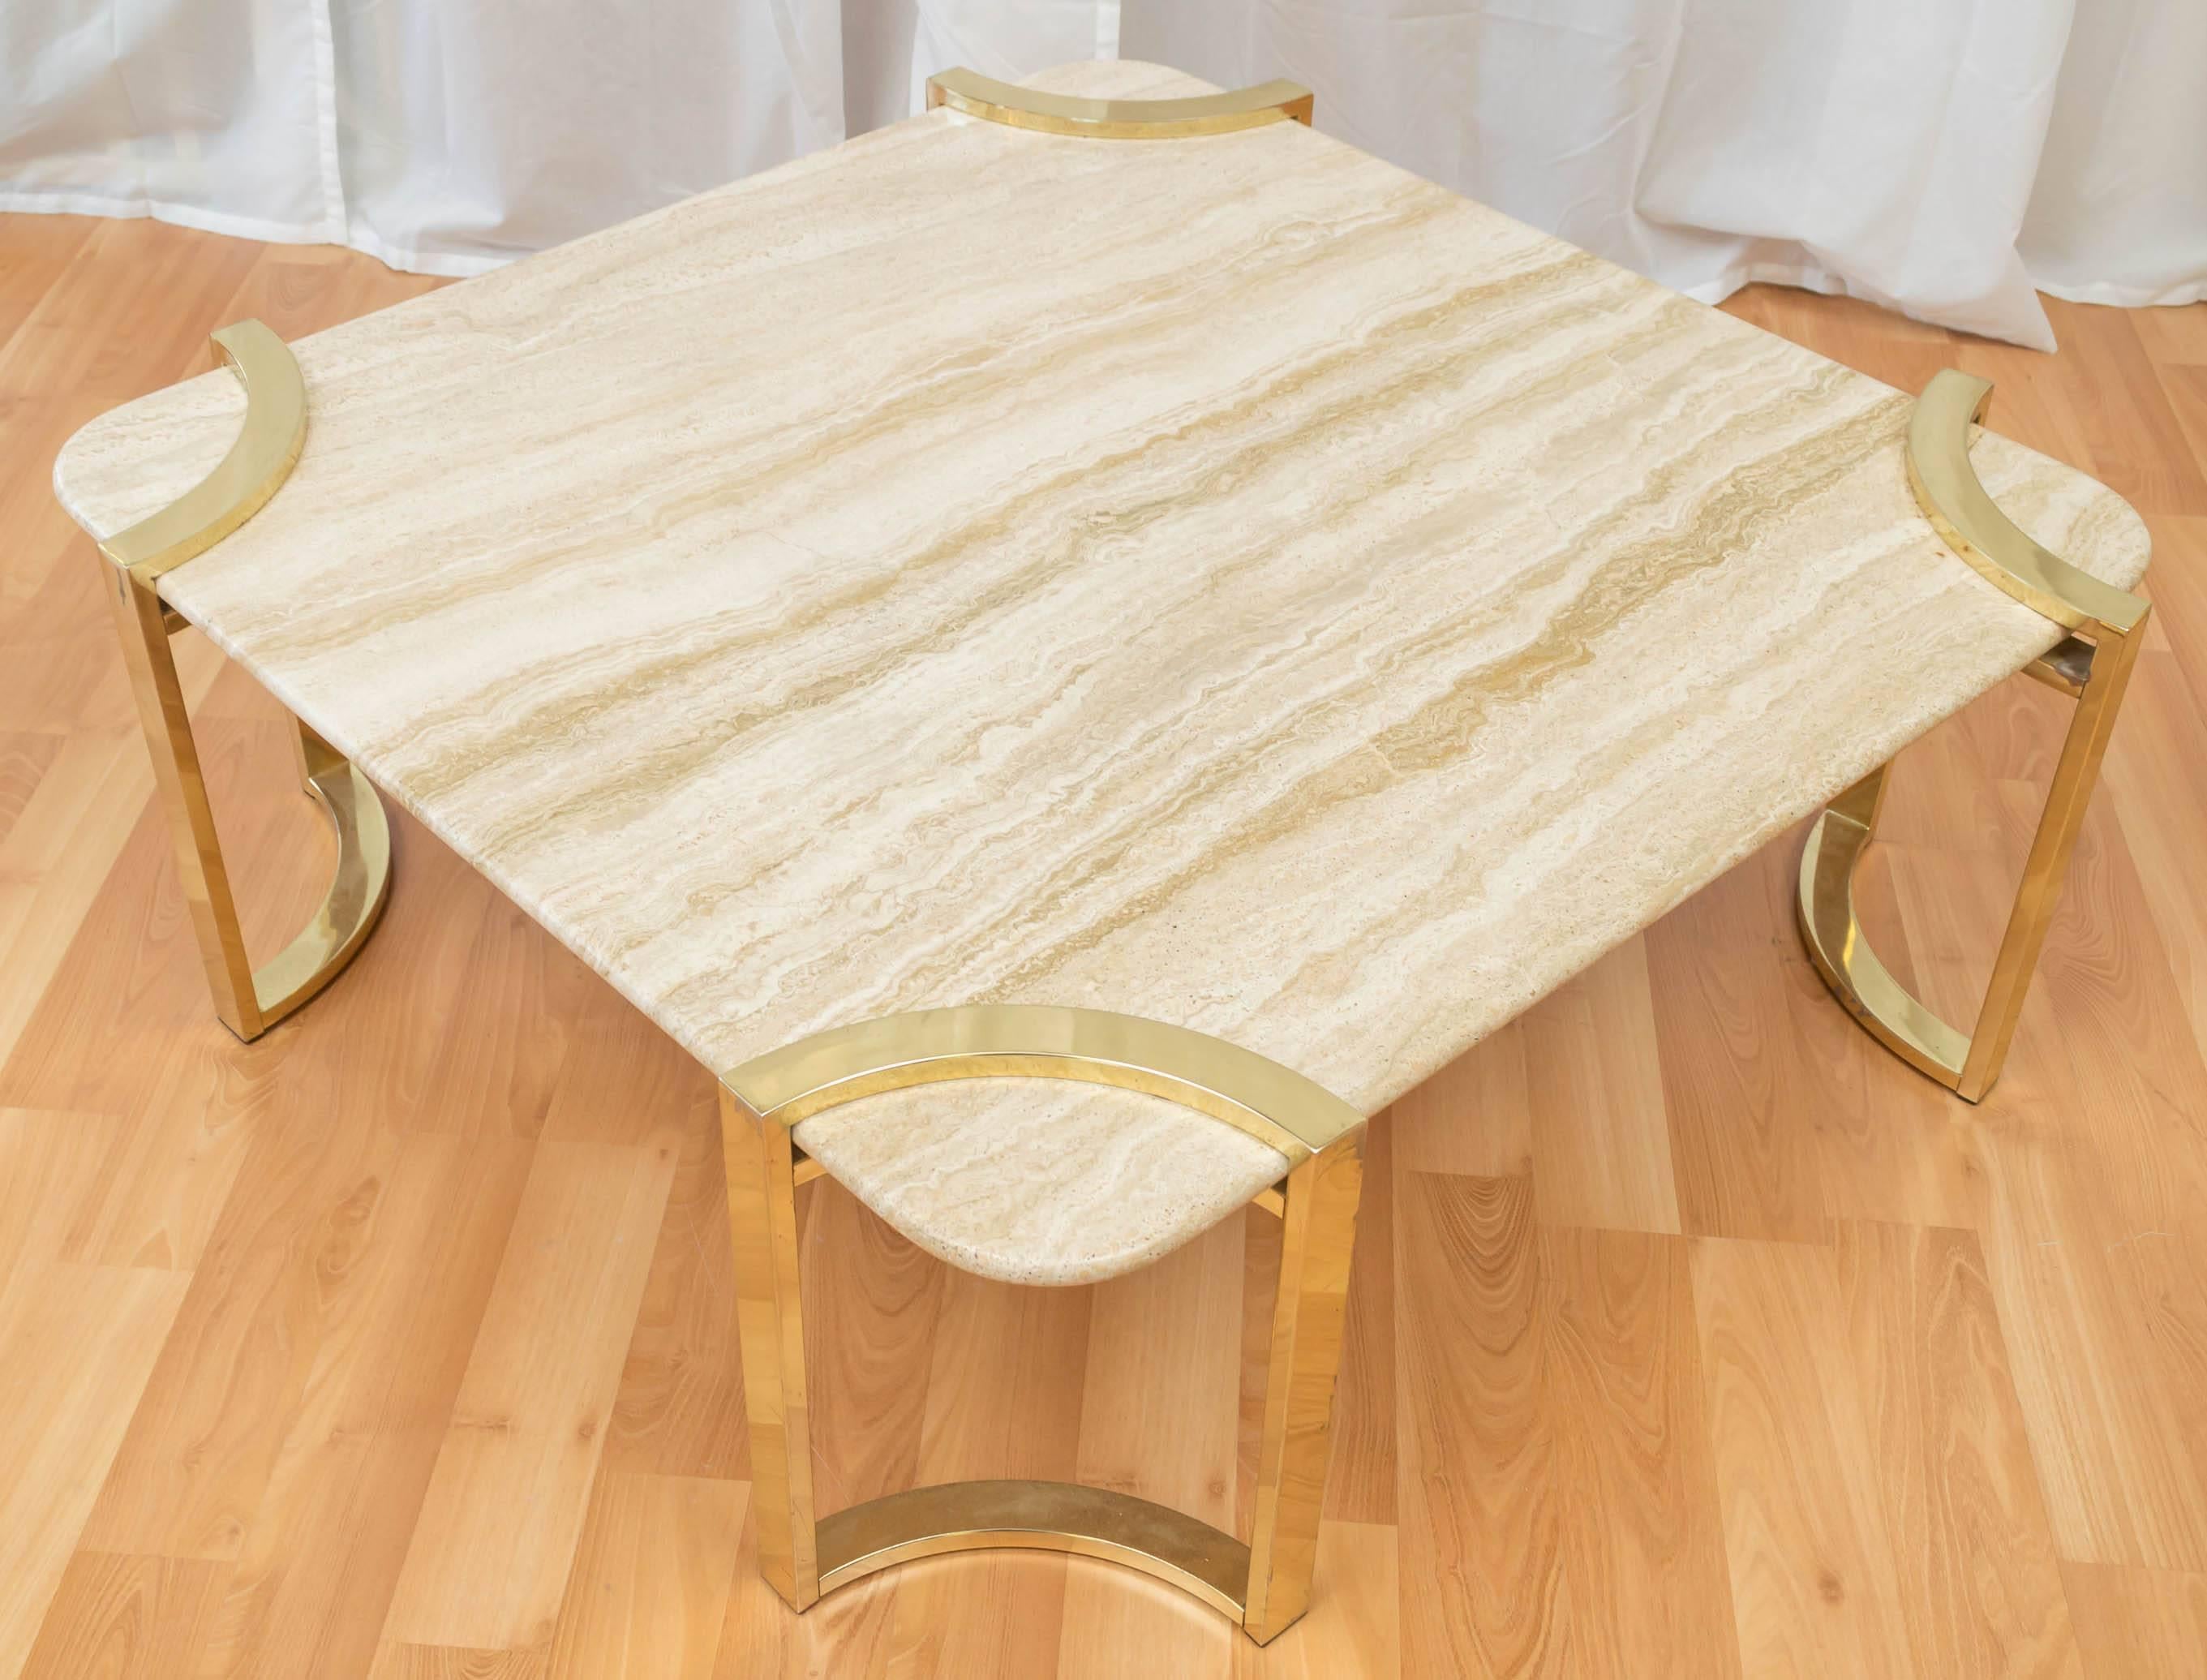 A generously proportioned Italian travertine coffee table with brass-plated steel base.

The clever curved geometry of the four independent, suspension-mounted brass legs calls to mind the designs of Milo Baughman. The .75 inch single slab